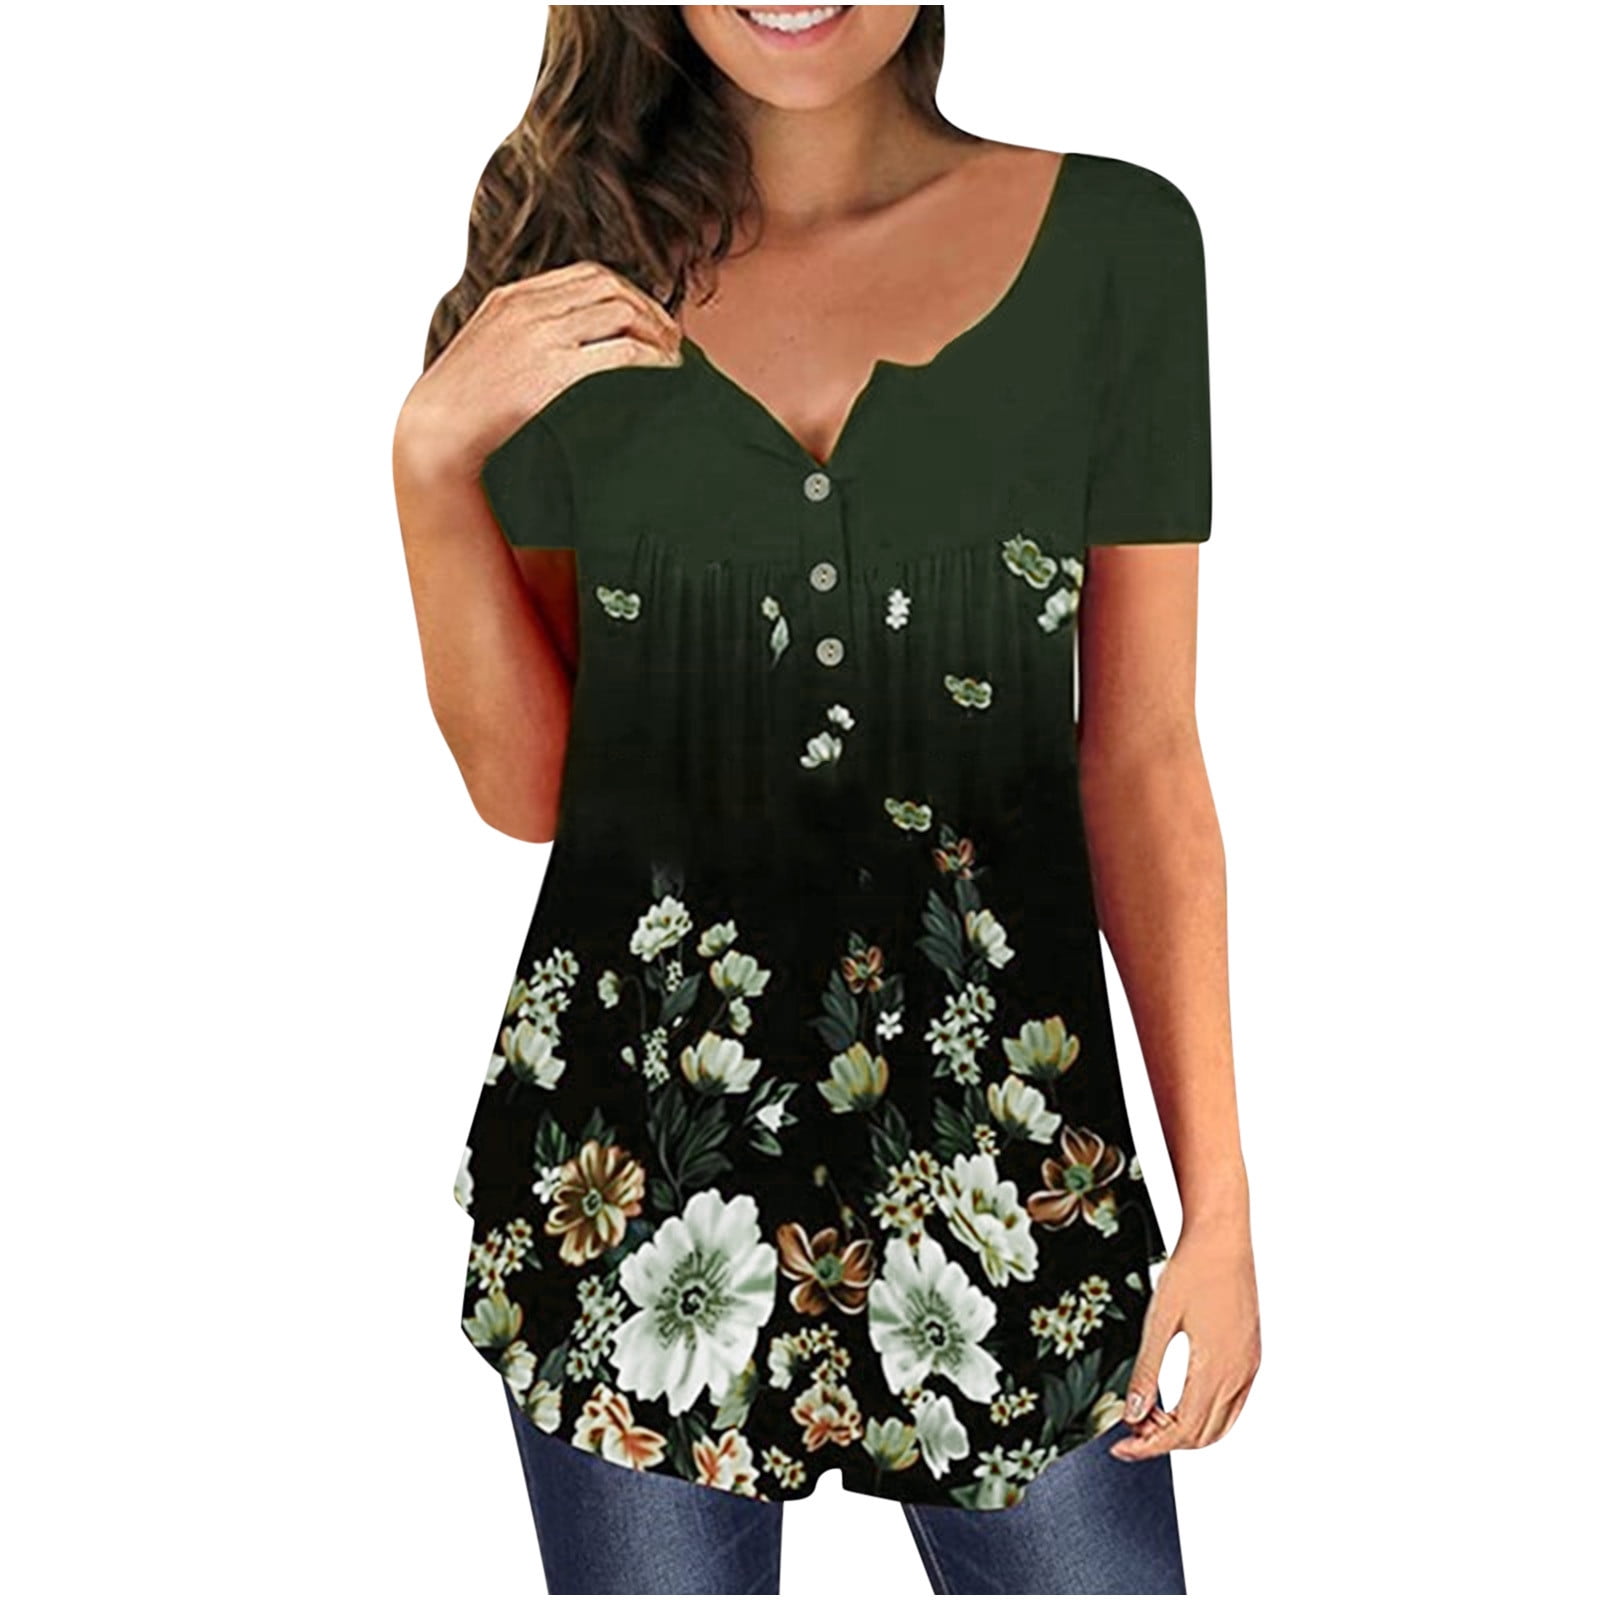 JGGSPWM Women Floral Blouse Casual Comfy Tops Fashion Summer Tshirts Short  Sleeve Shirts Crew Neck Tees Button Up Tunic Army Green M